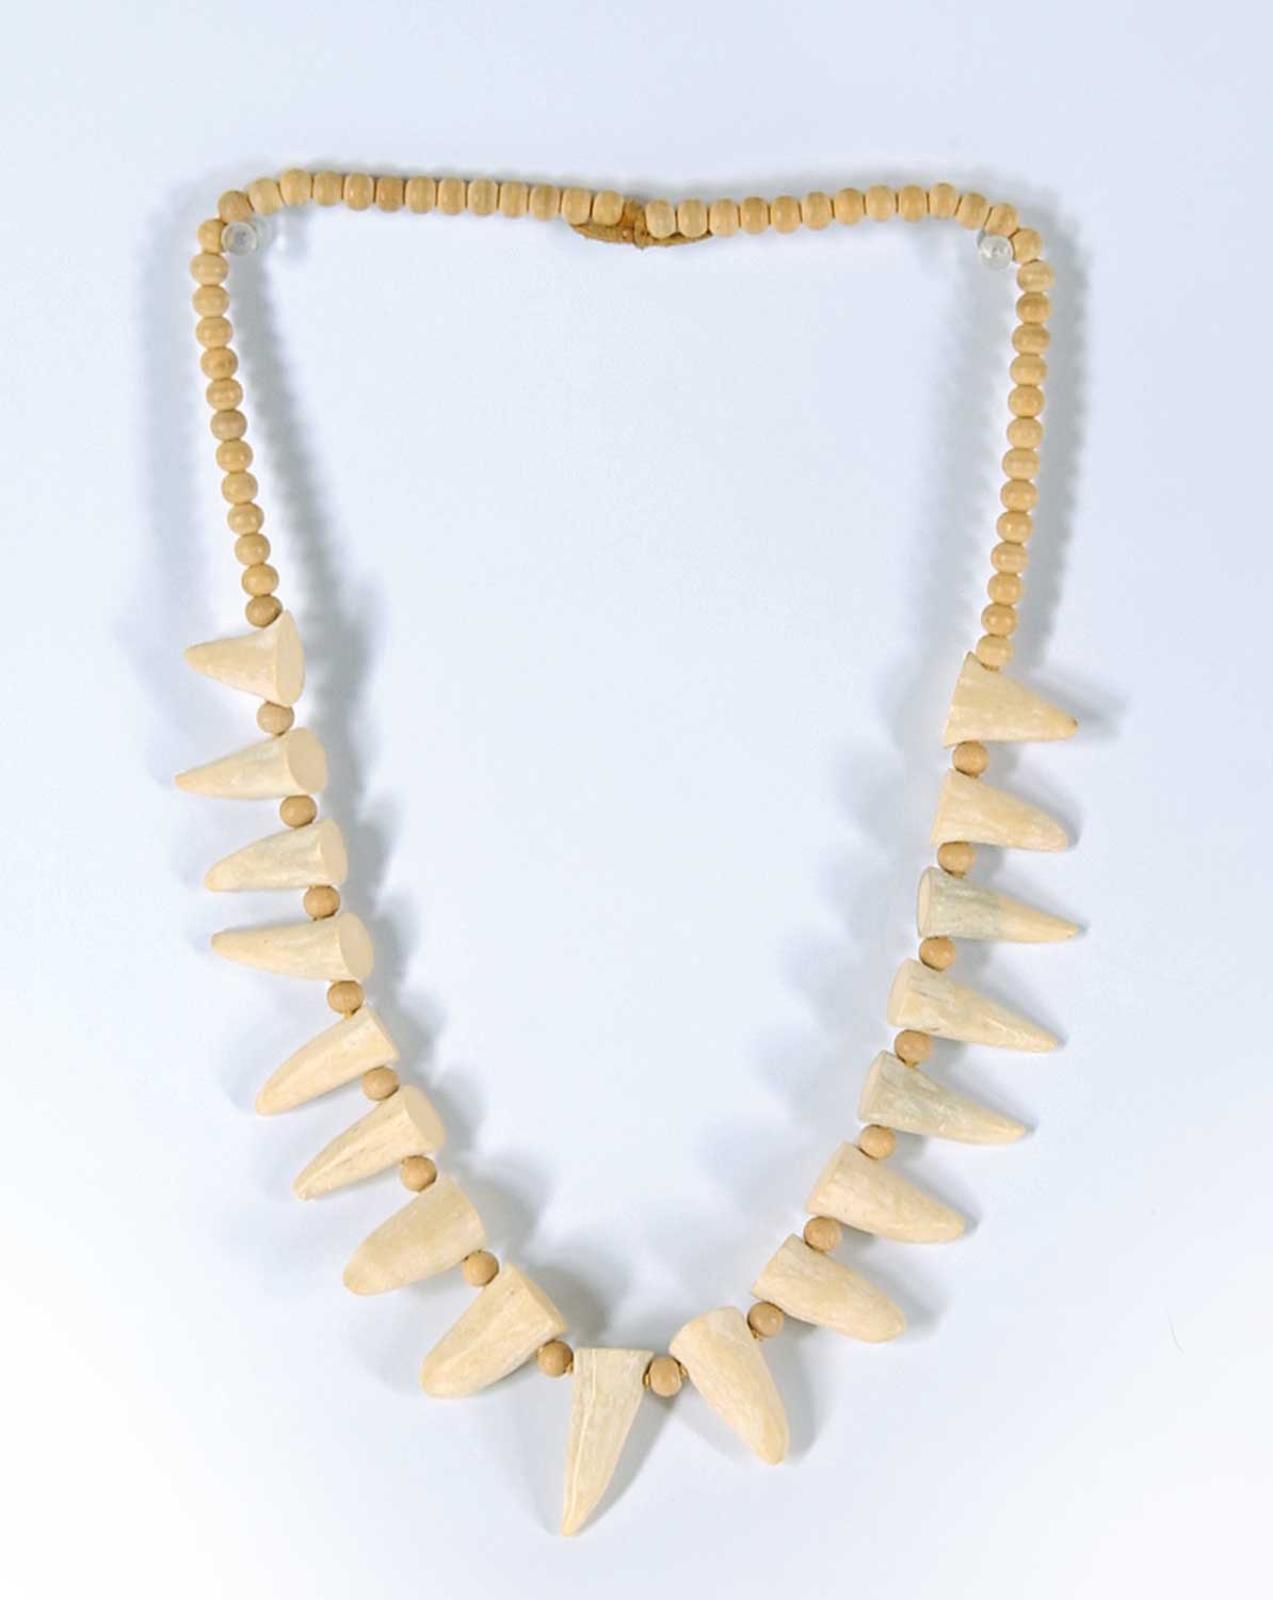 Robert Charles Aller (1922-2008) - Untitled - Whale Tooth Necklace